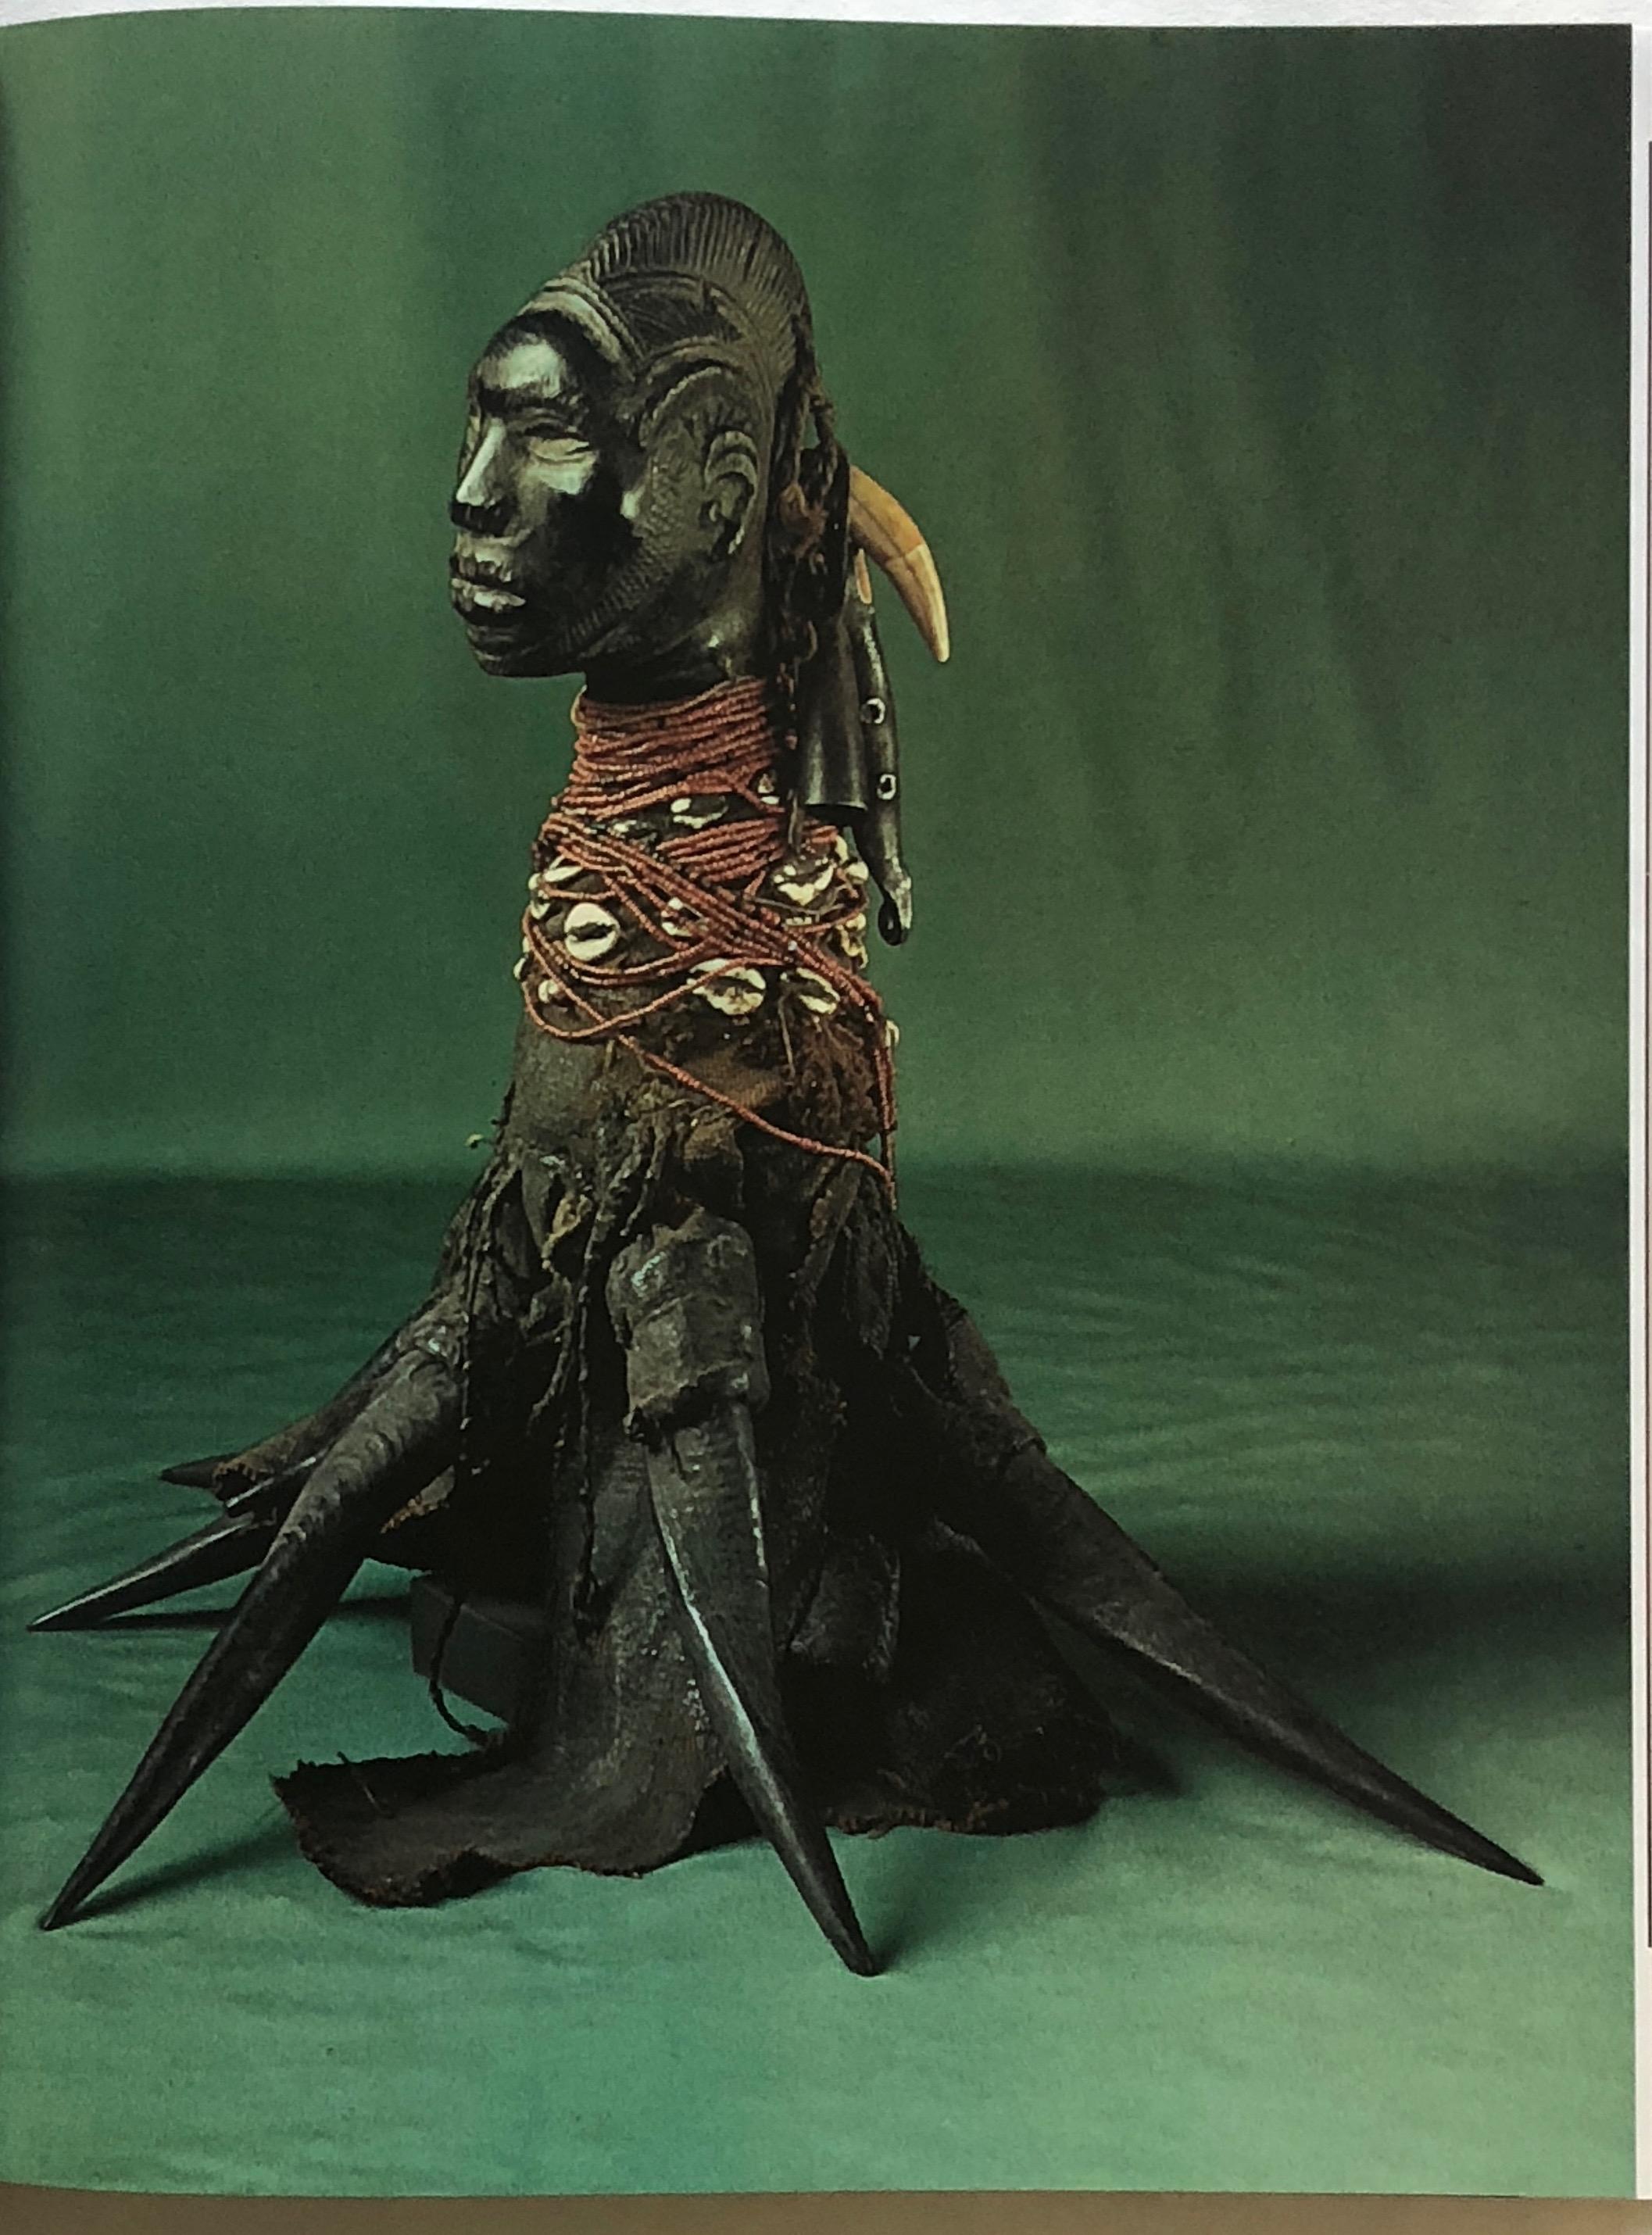 Africa, Tribal Art of Forest and Savanna, 1st edition, Published by Thames & Hudson, 1980.
Over 200 treasures of African art drawn from rarely seen private collections and beautifully photographed. Renowned collector Arnold Bamert writes about the